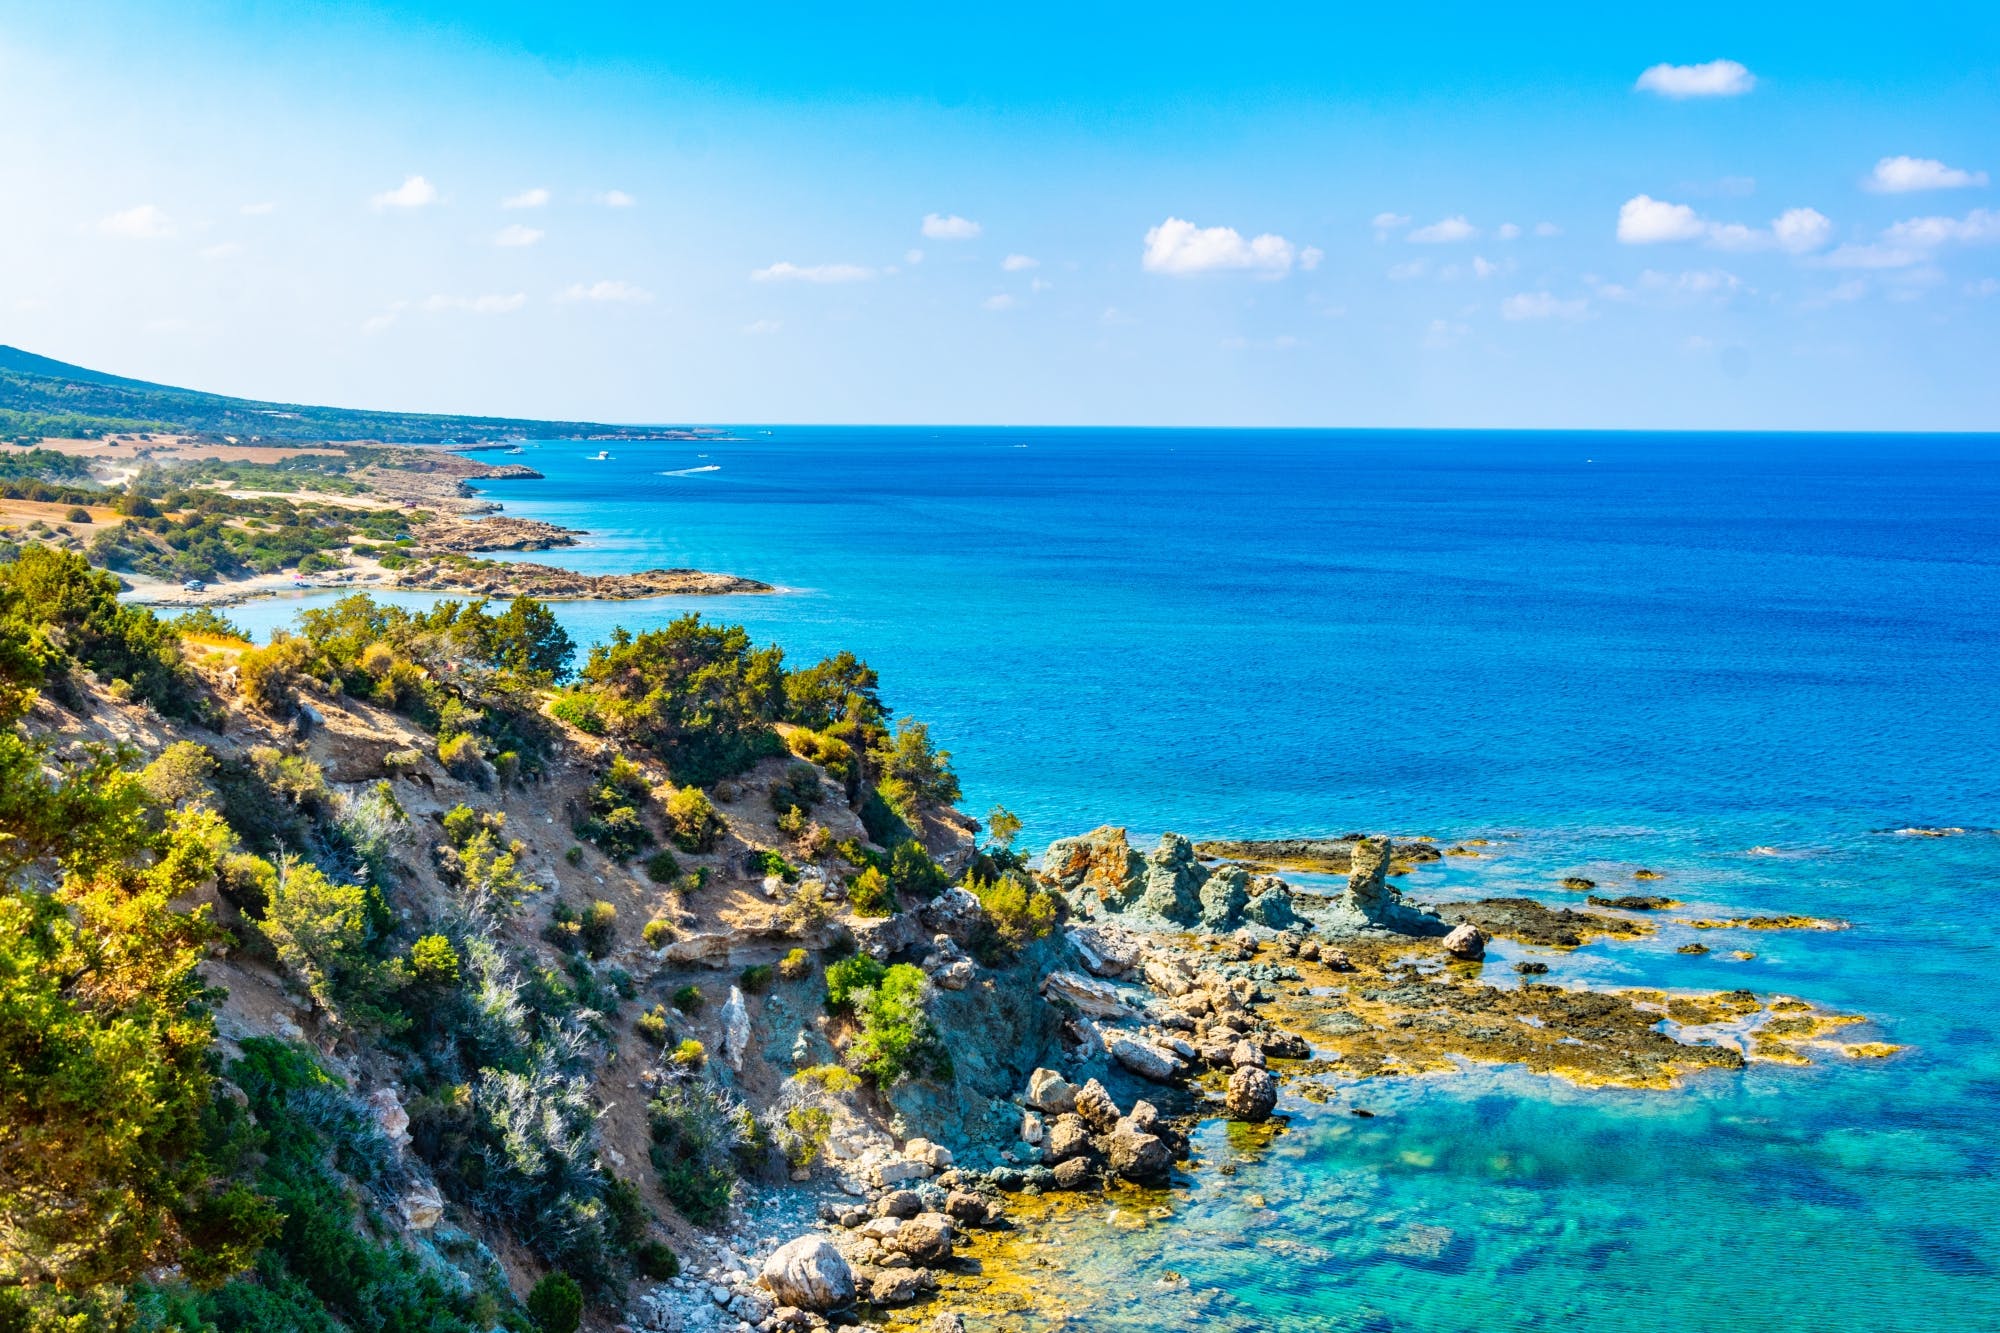 A scenic view of Akamas National Park's rugged coastline, turquoise waters, and rocky cliffs - a must-visit attraction and one of the top things to do in Cyprus for nature lovers.